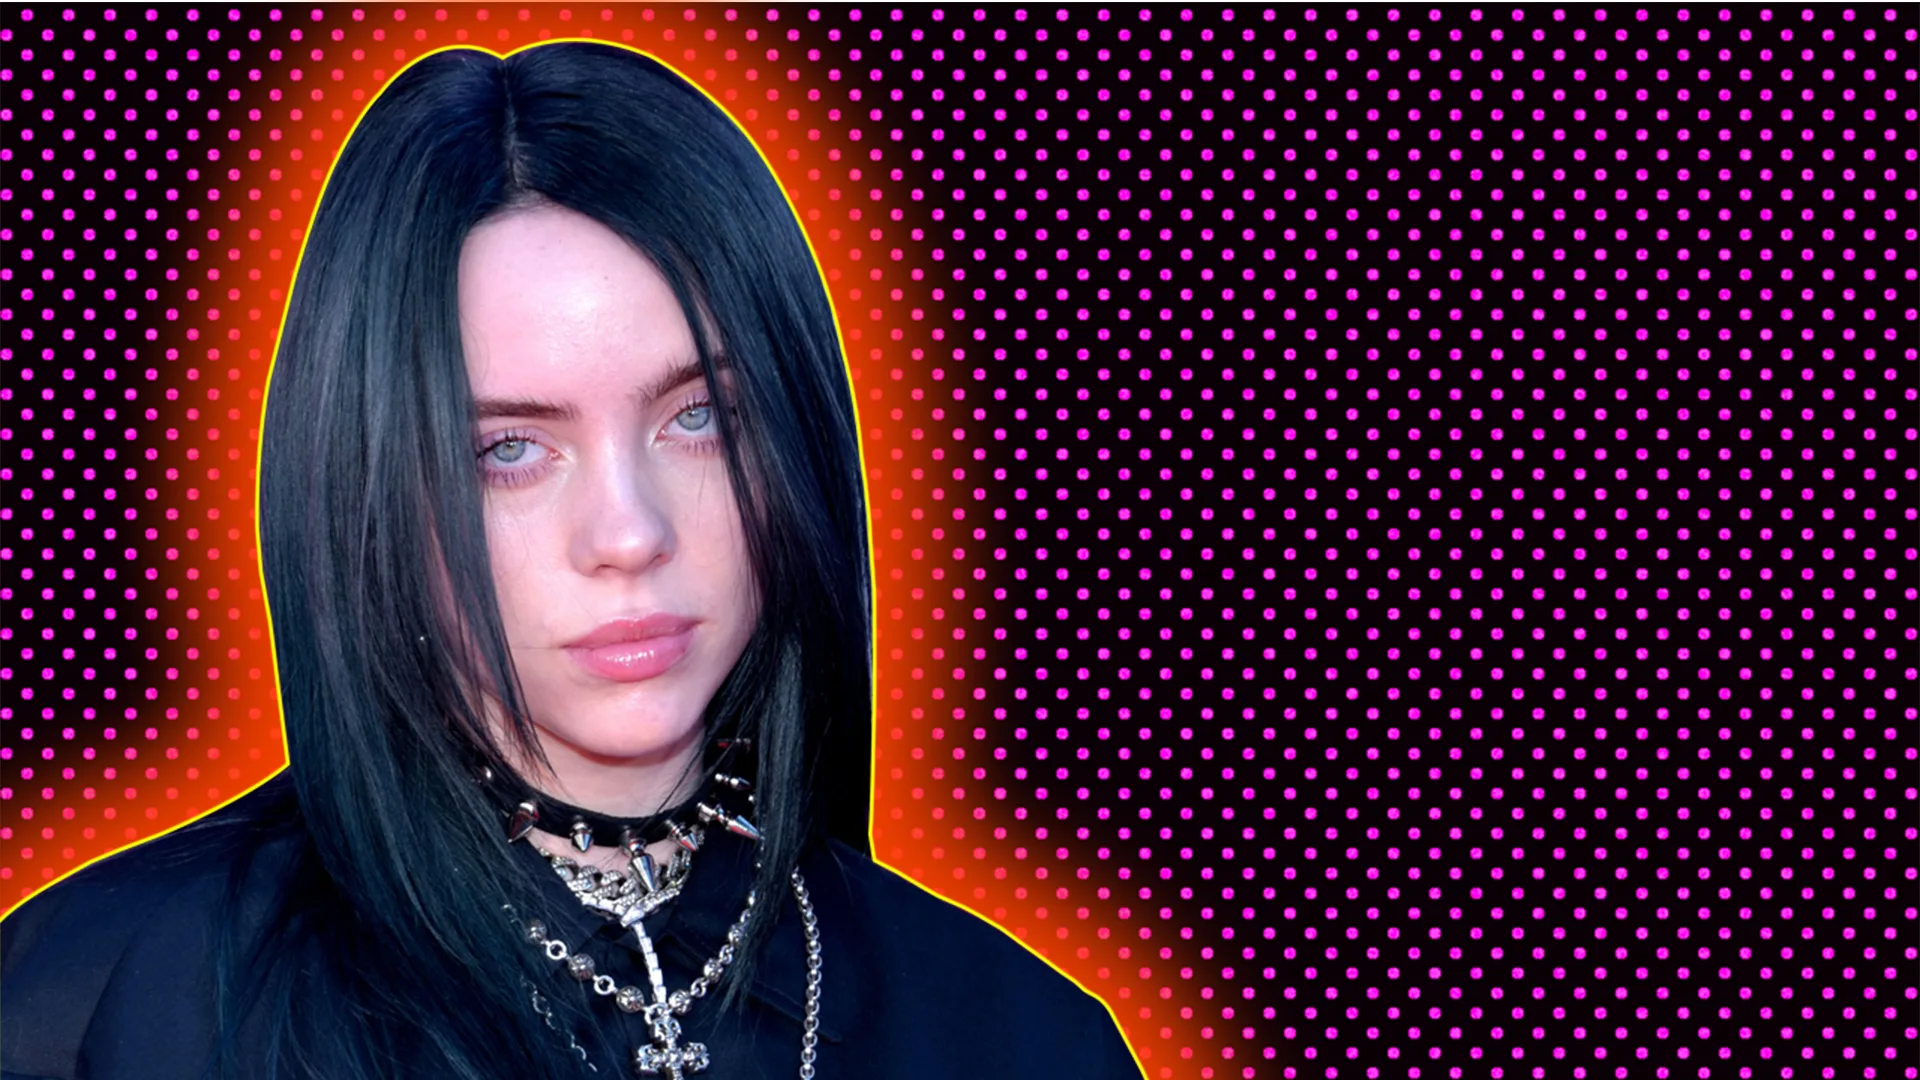 Billie Eilish wearing dark outfit and layered chain necklace, outlined by red halo effect on black and pink-dotted background.